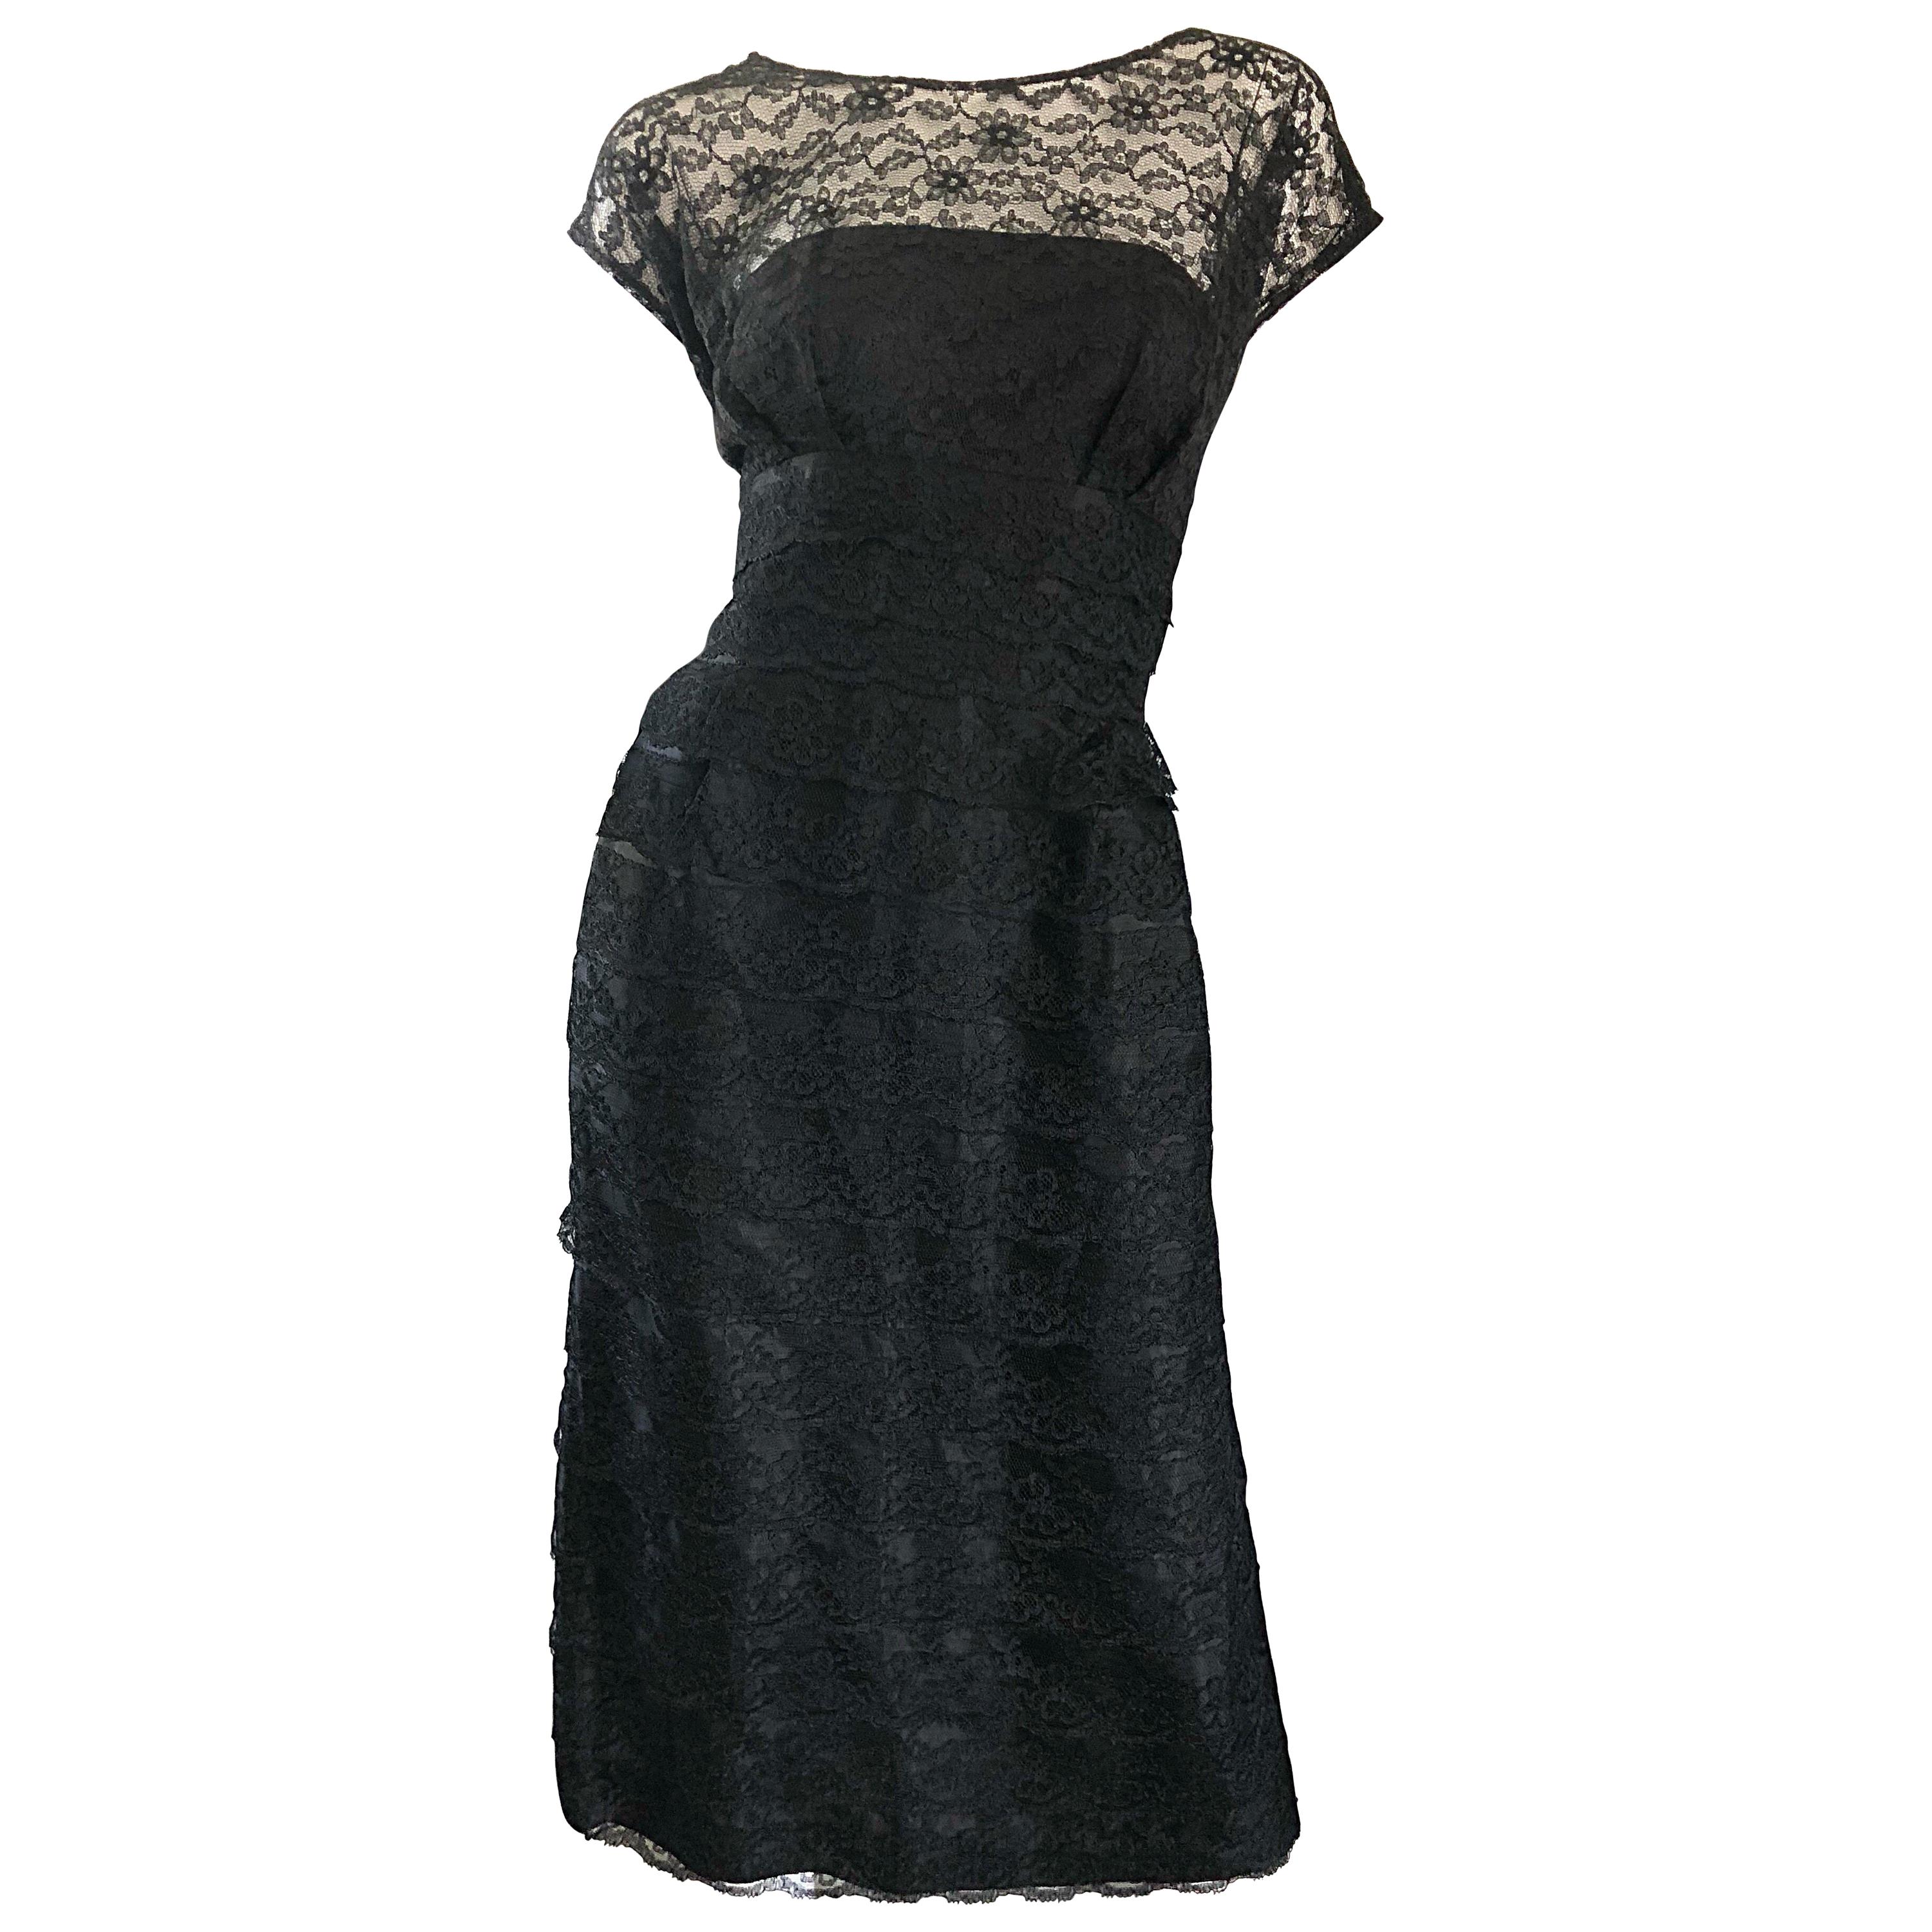 Chic 1950s Demi Couture Black French Lace Nude Illusion Vintage 50s Silk Dress For Sale